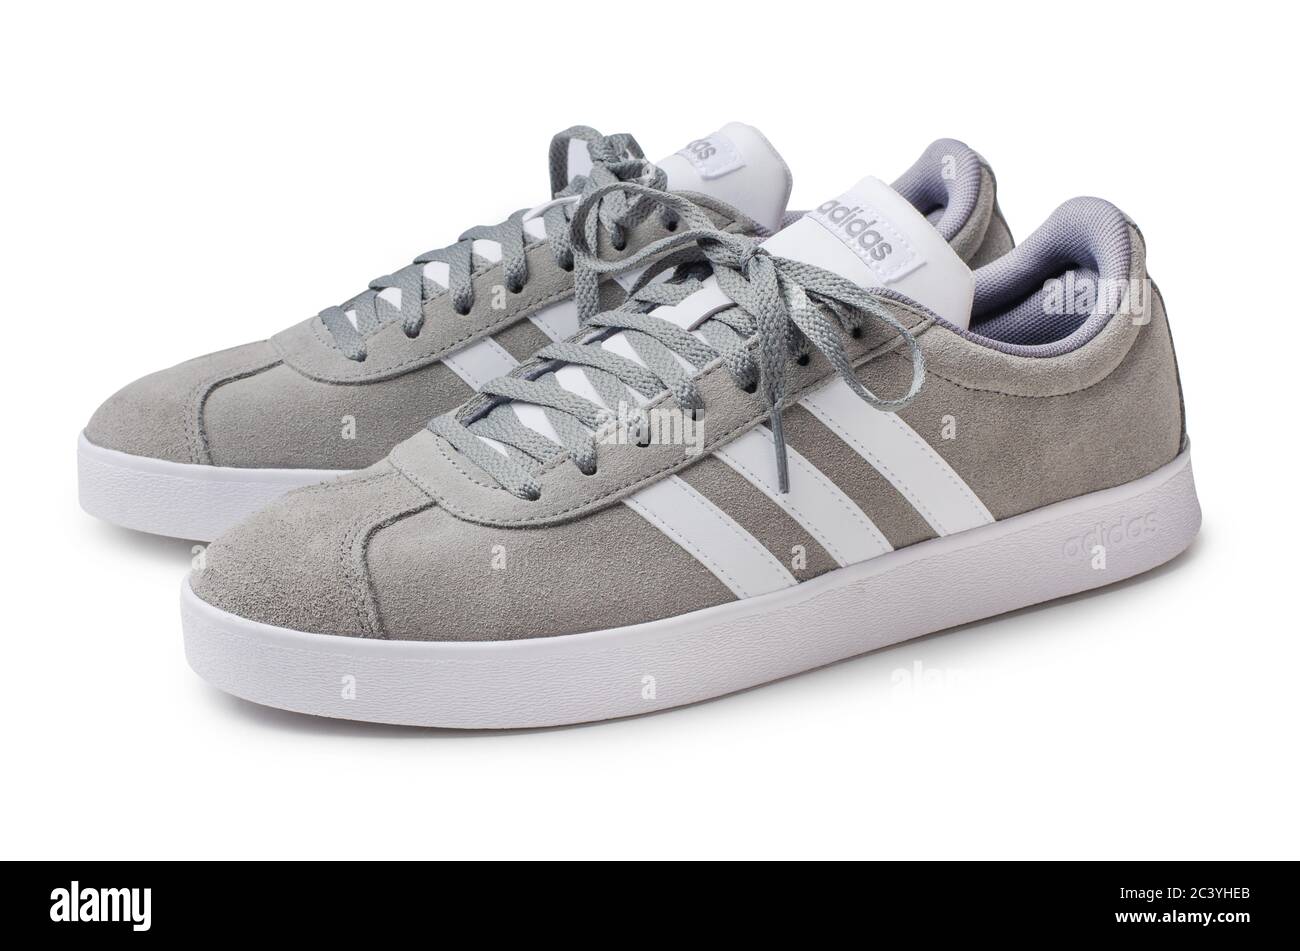 Moscou, Russie - 14 mars 2020 : baskets ADIDAS Grey Skaters isolées sur fond blanc Banque D'Images